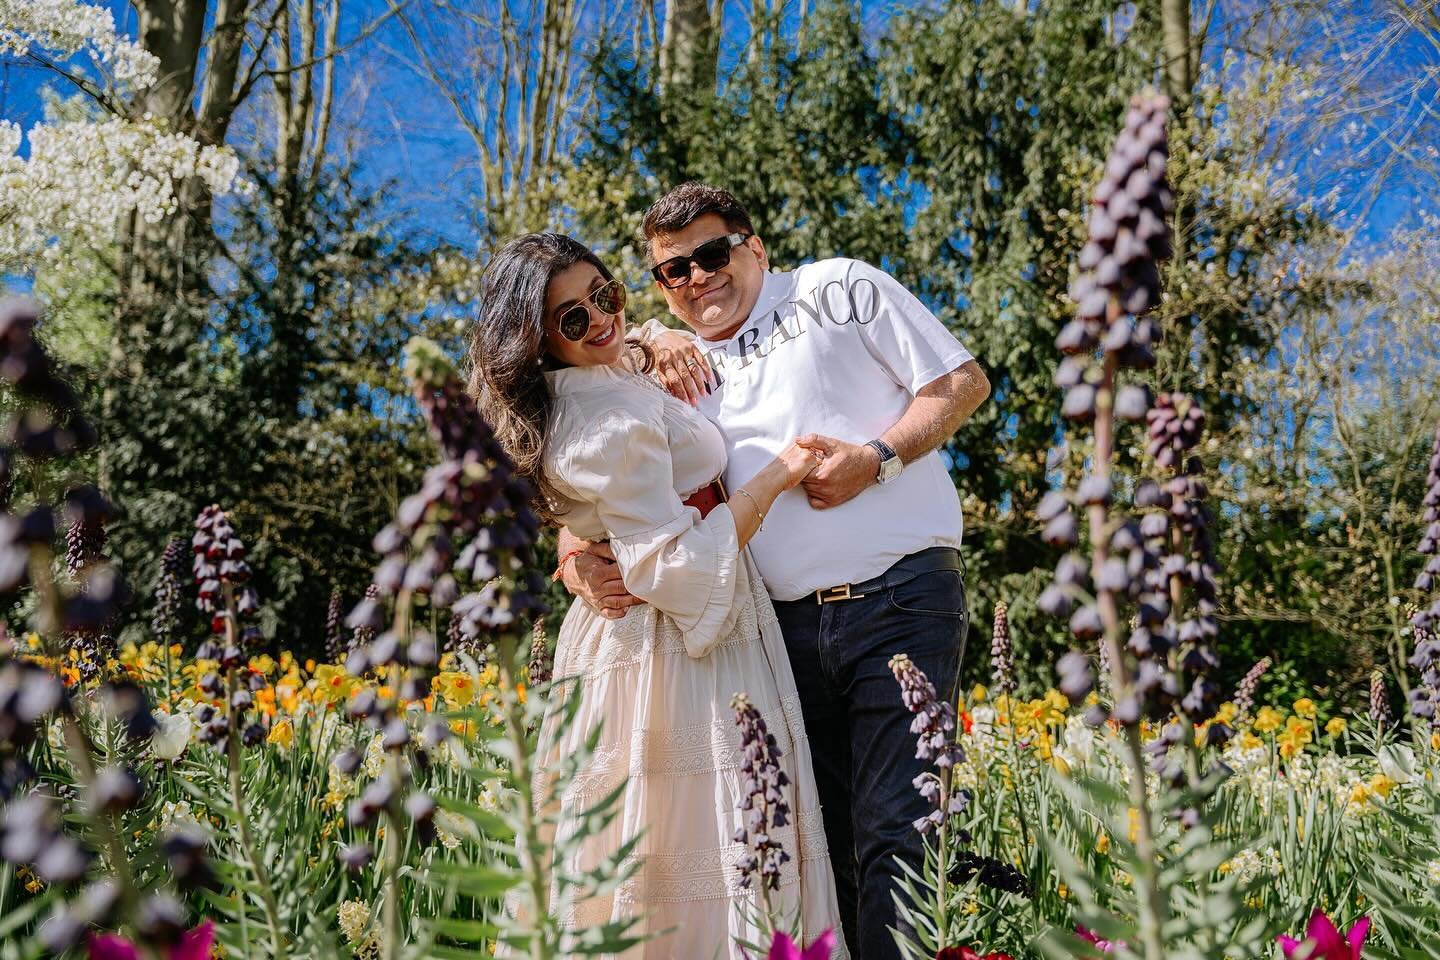 In the heart of spring, when the Keukenhof Gardens transform into a vibrant canvas of blooming tulips, Mr &amp; Mrs Kothari decided it was the perfect moment for their couple&rsquo;s photoshoot. 

These two really knew how to show off their love for 